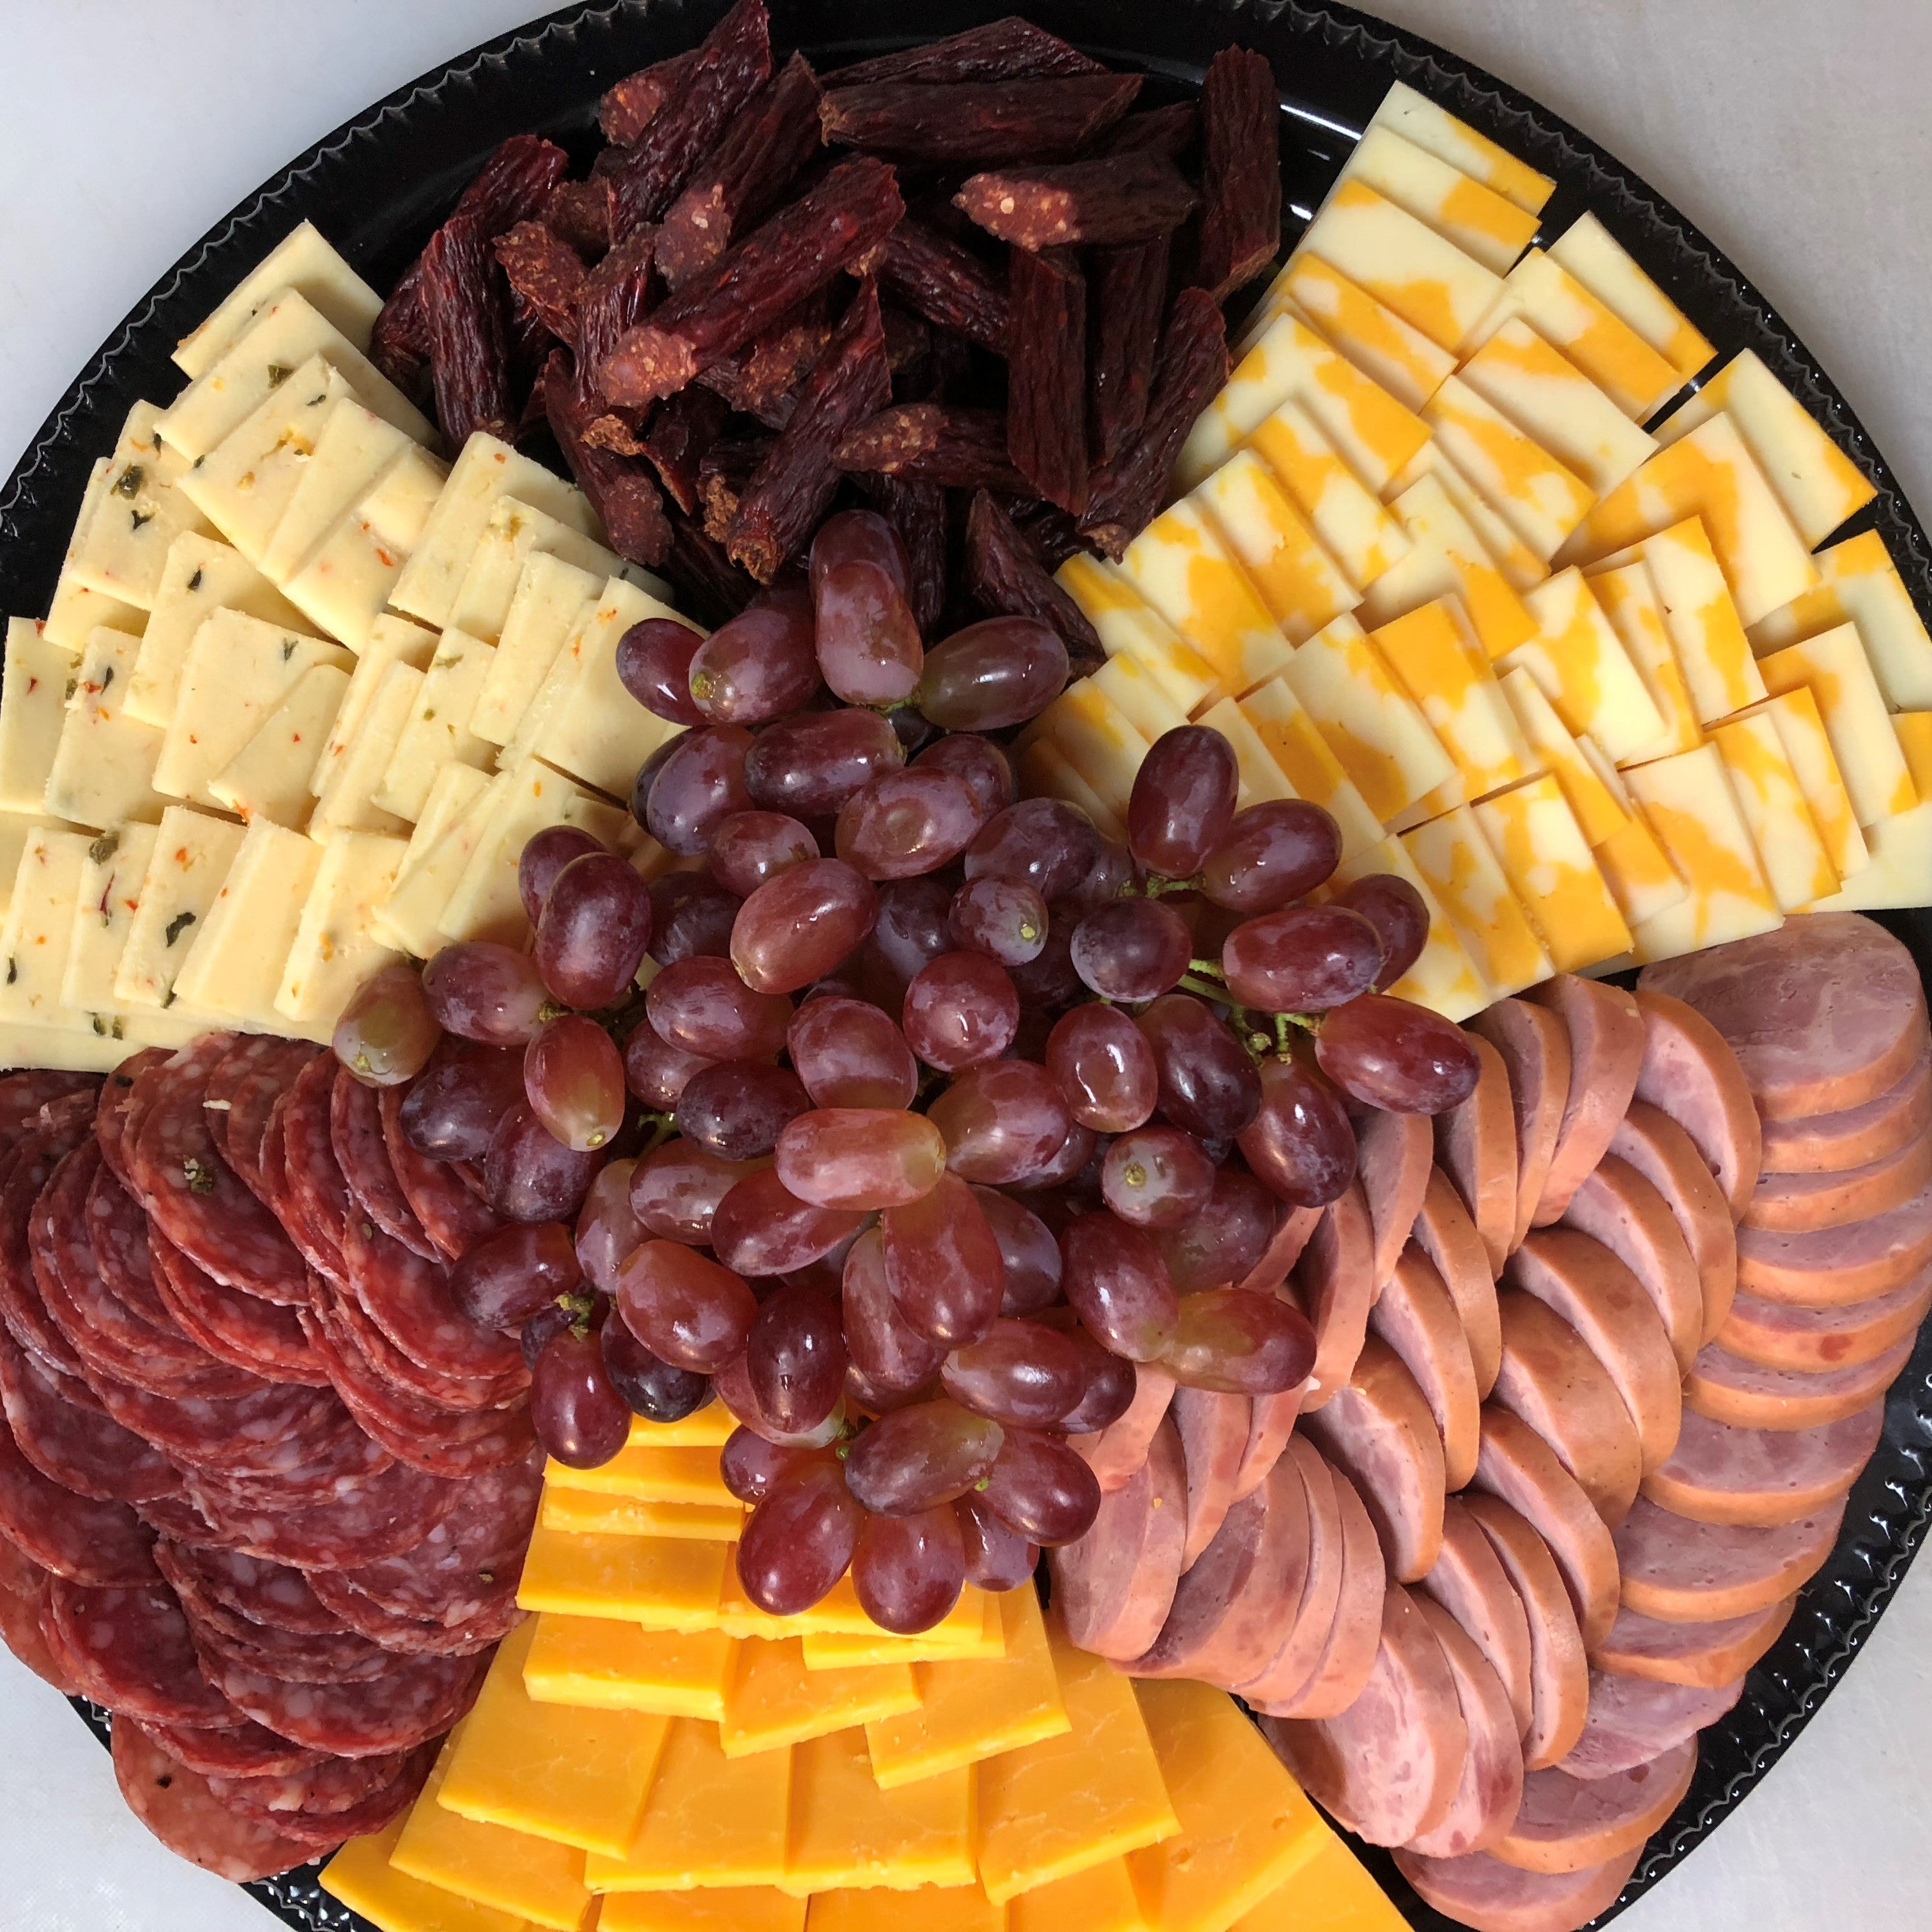 Cheese & Meat Tray